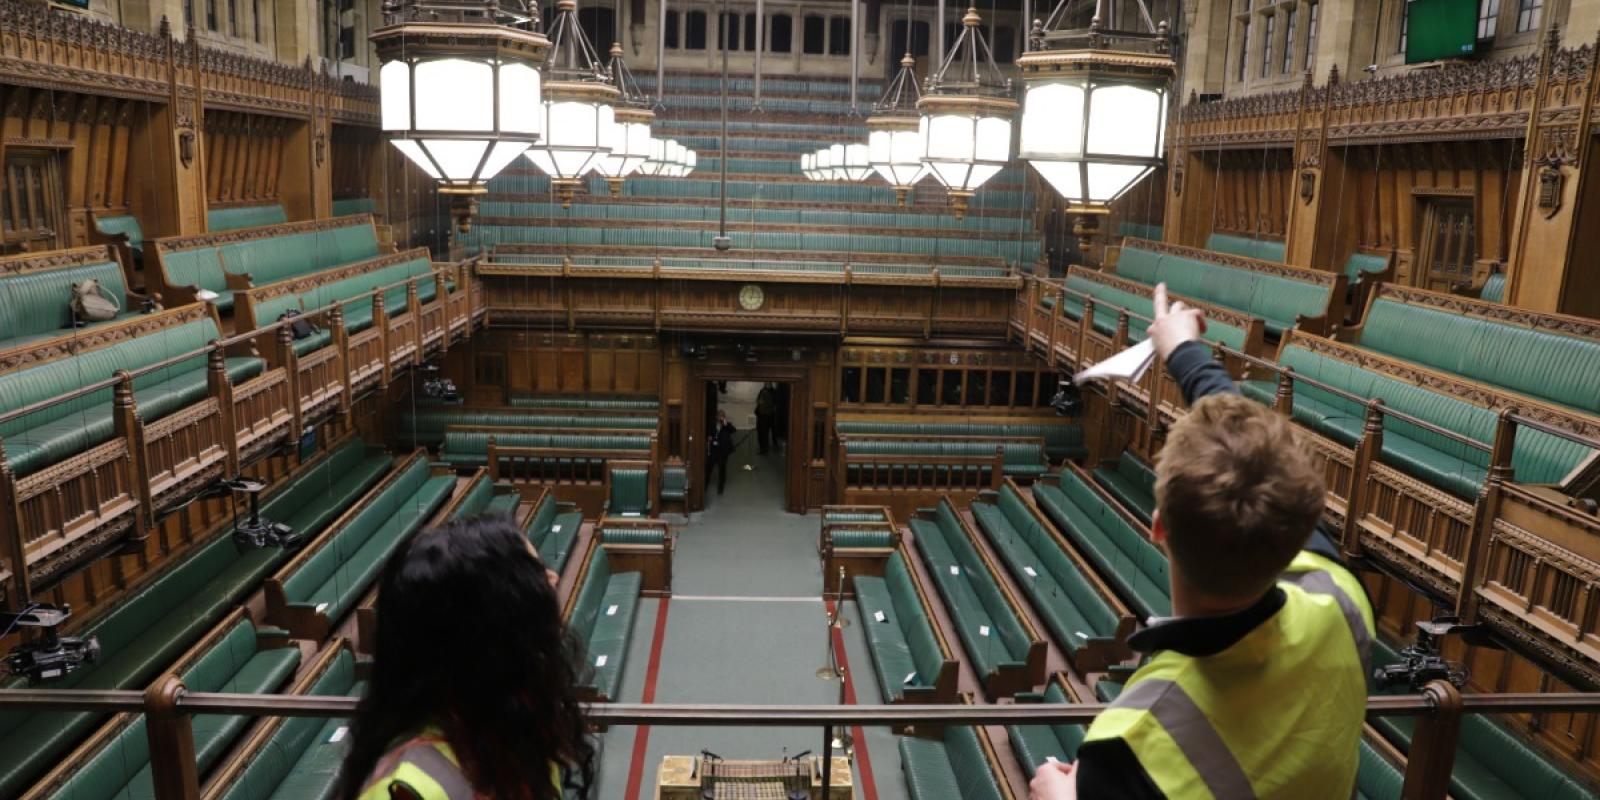 DBR wins contract for intrusive surveying of the Houses of Parliament